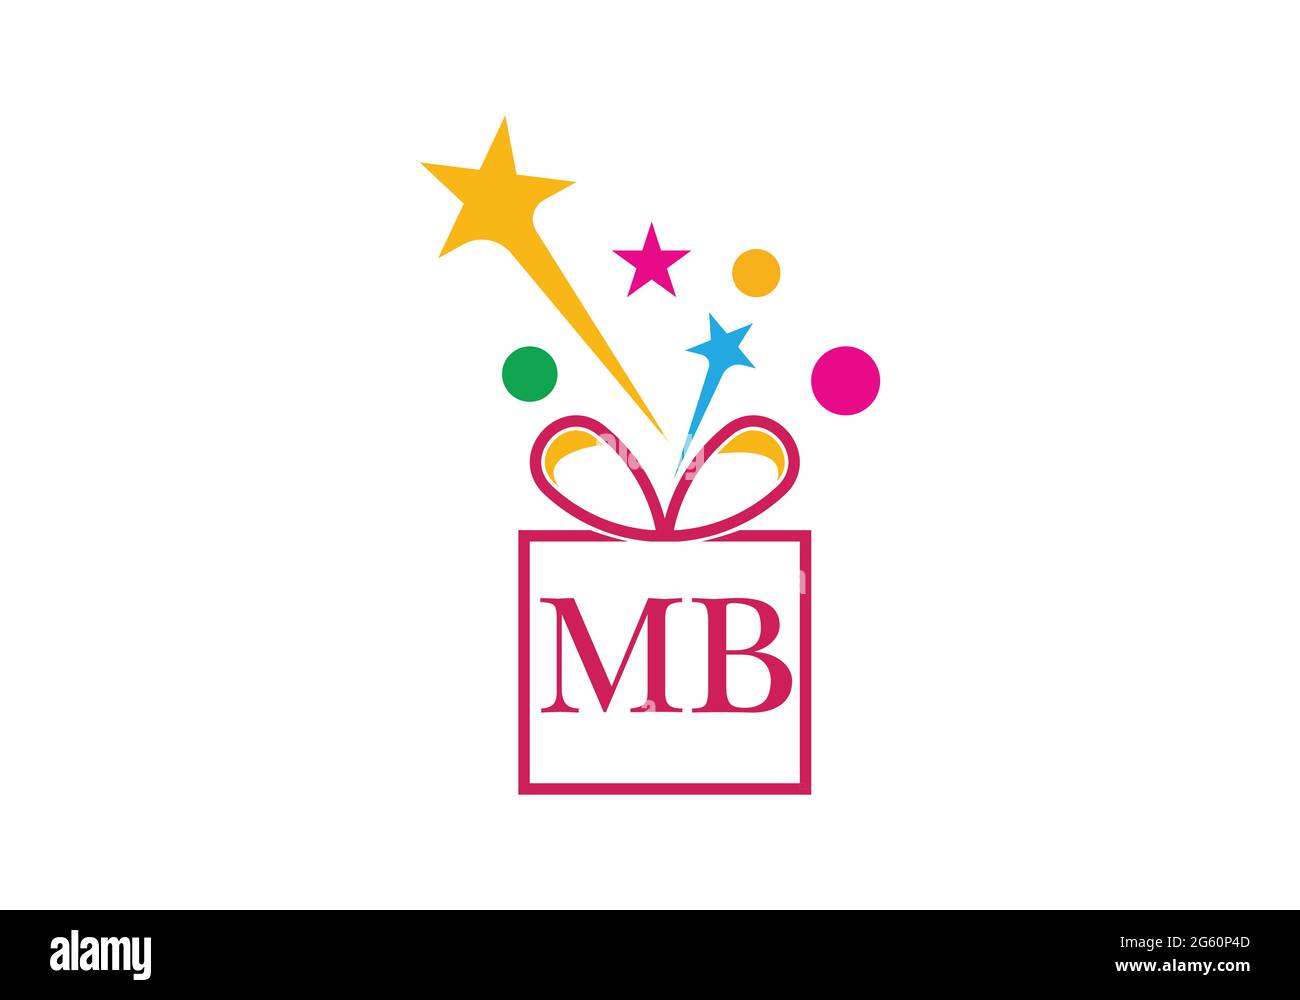 Gift Box, gift shop letter alphabet M B logo icon for Luxury brand design for wedding invitations, greeting card, logo, and other design. Stock Vector